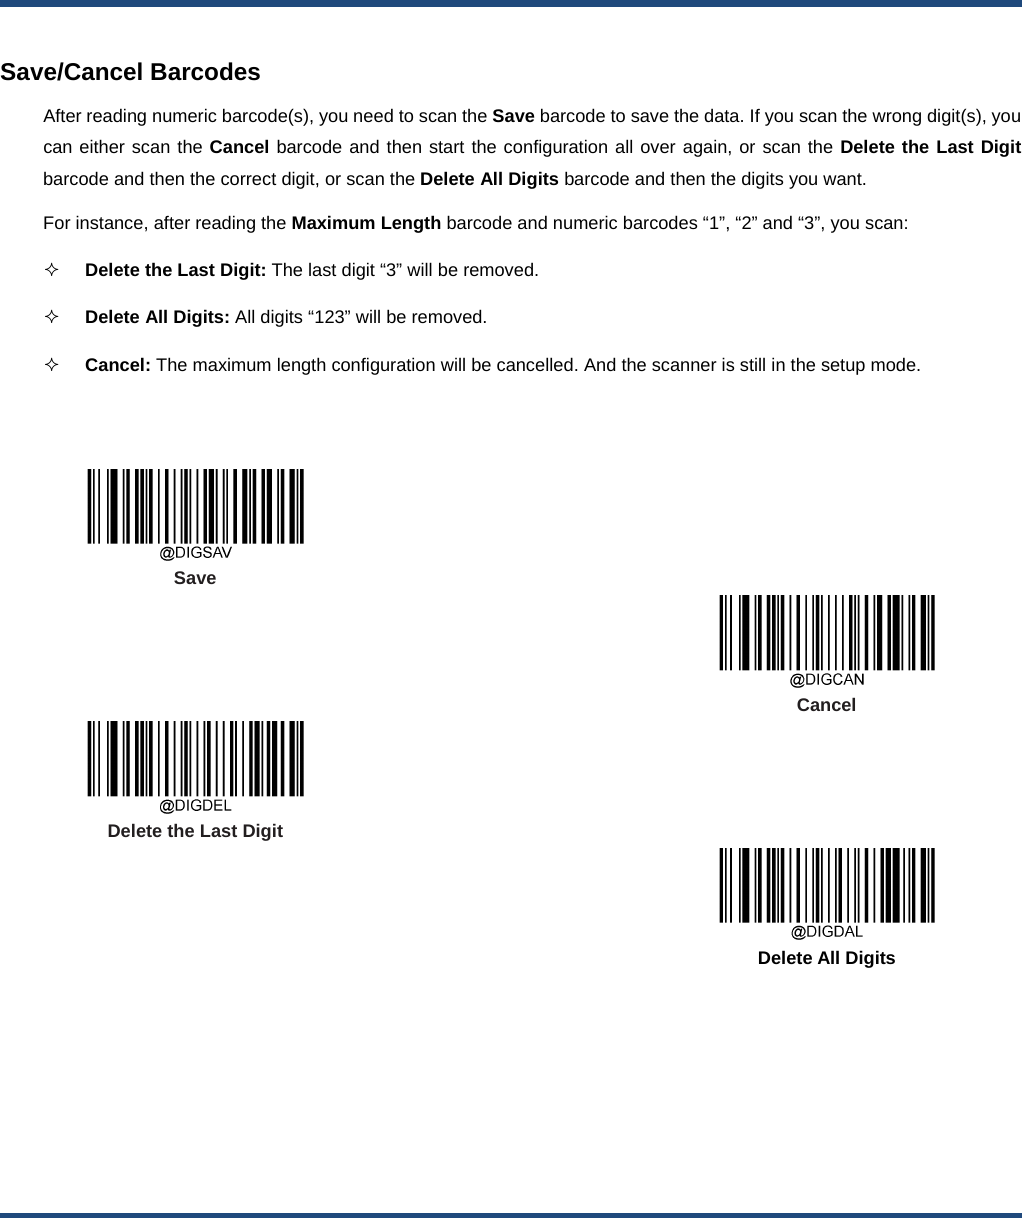    Save/Cancel Barcodes After reading numeric barcode(s), you need to scan the Save barcode to save the data. If you scan the wrong digit(s), you can either scan the Cancel barcode and then start the configuration all over again, or scan the Delete the Last Digit barcode and then the correct digit, or scan the Delete All Digits barcode and then the digits you want. For instance, after reading the Maximum Length barcode and numeric barcodes “1”, “2” and “3”, you scan:    Delete the Last Digit: The last digit “3” will be removed.  Delete All Digits: All digits “123” will be removed.  Cancel: The maximum length configuration will be cancelled. And the scanner is still in the setup mode.      Save      Cancel  Delete the Last Digit      Delete All Digits  